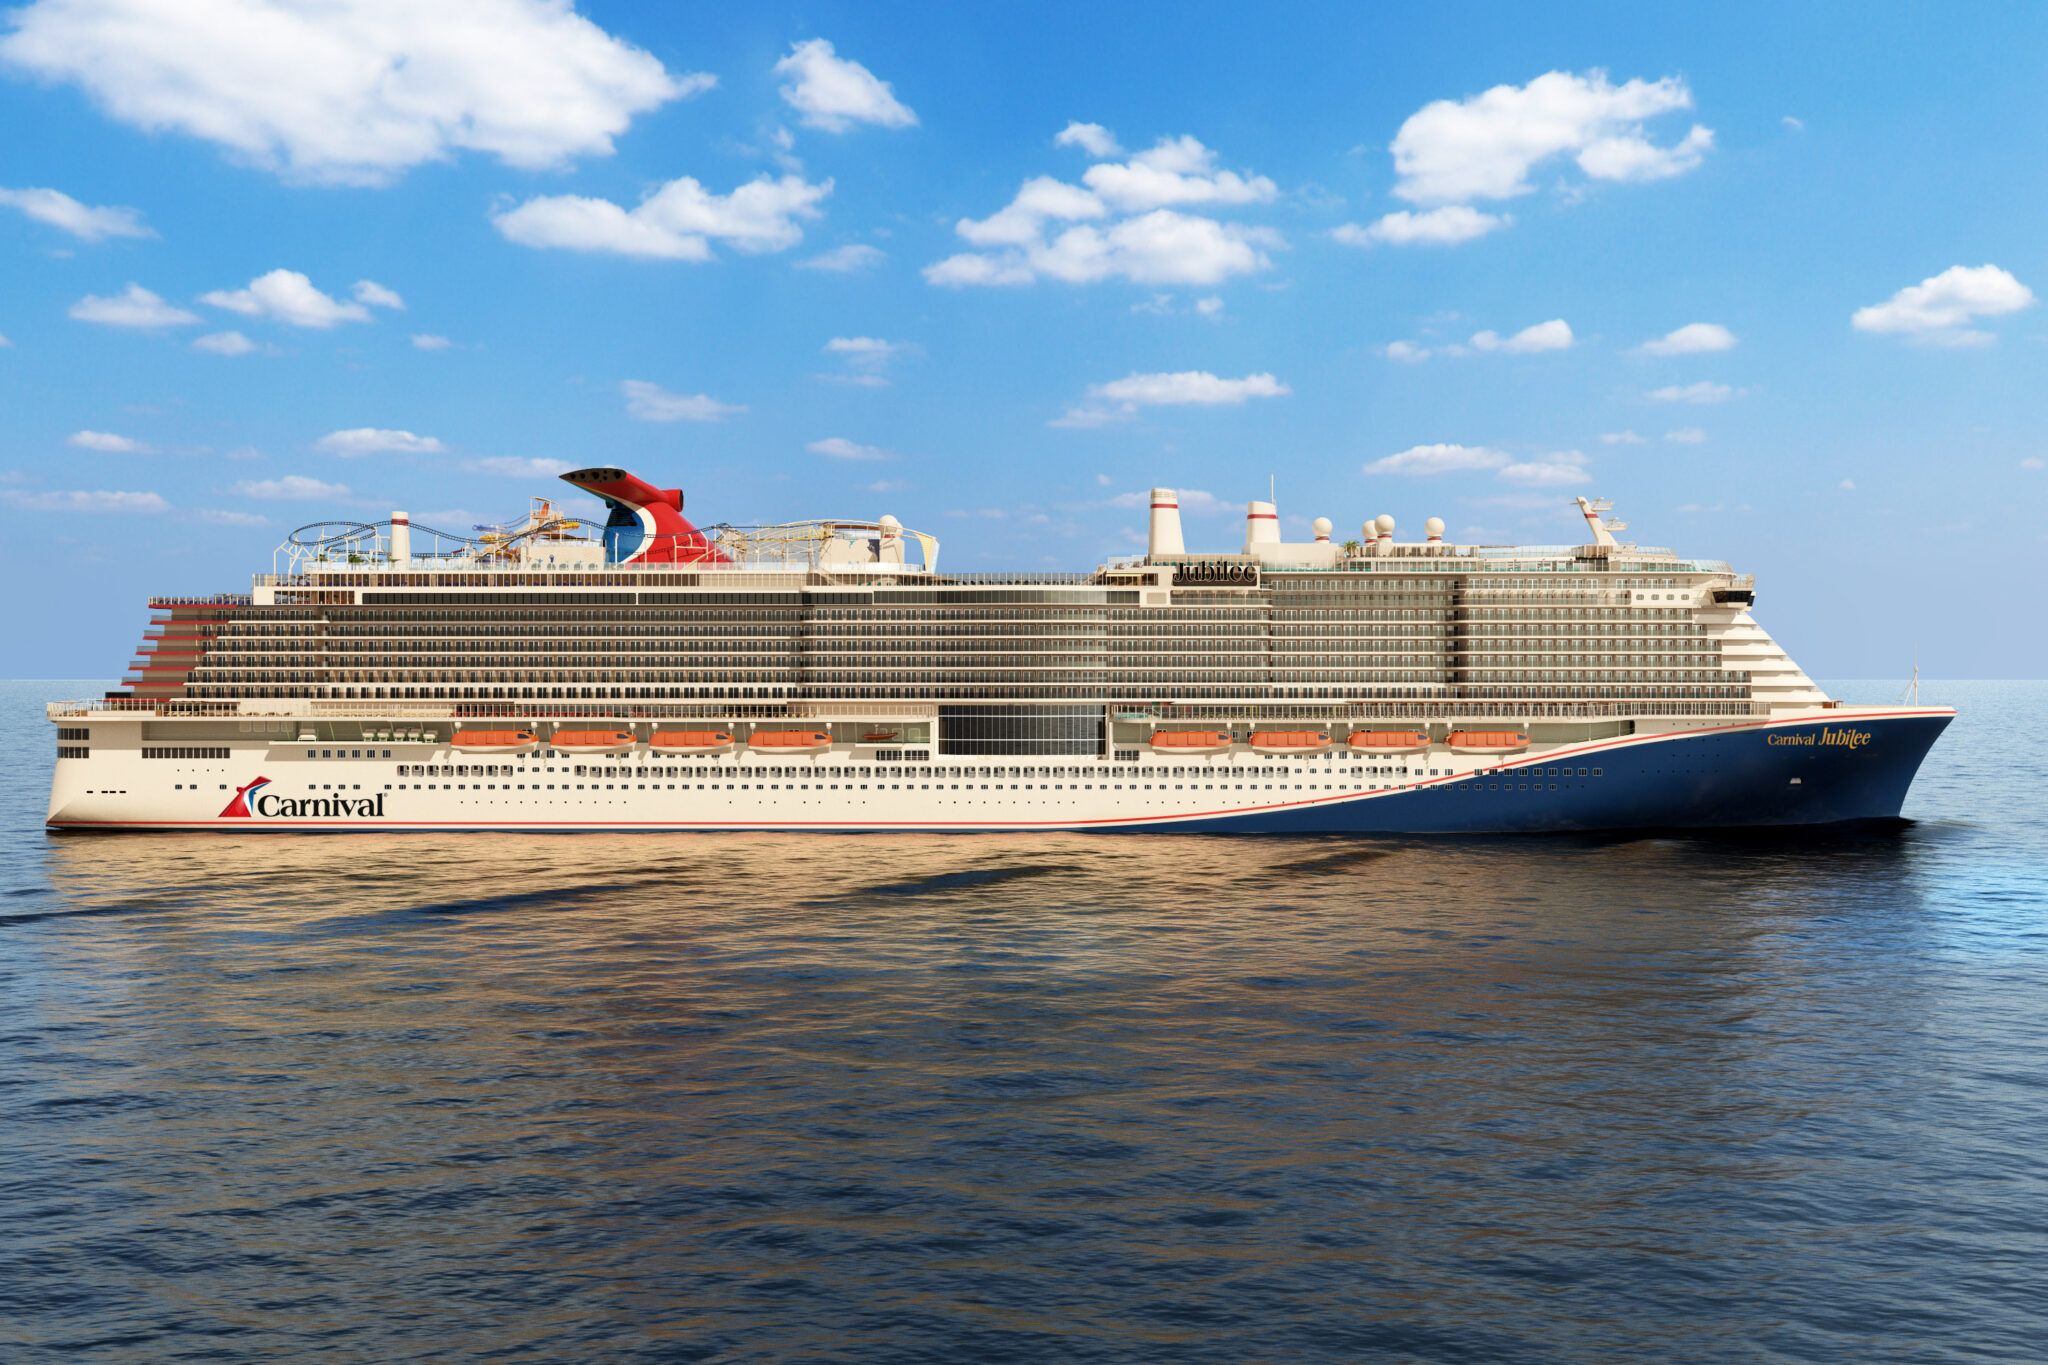 Carnival's New ExcelClass Ship Heading to Galveston Eat Sleep Cruise